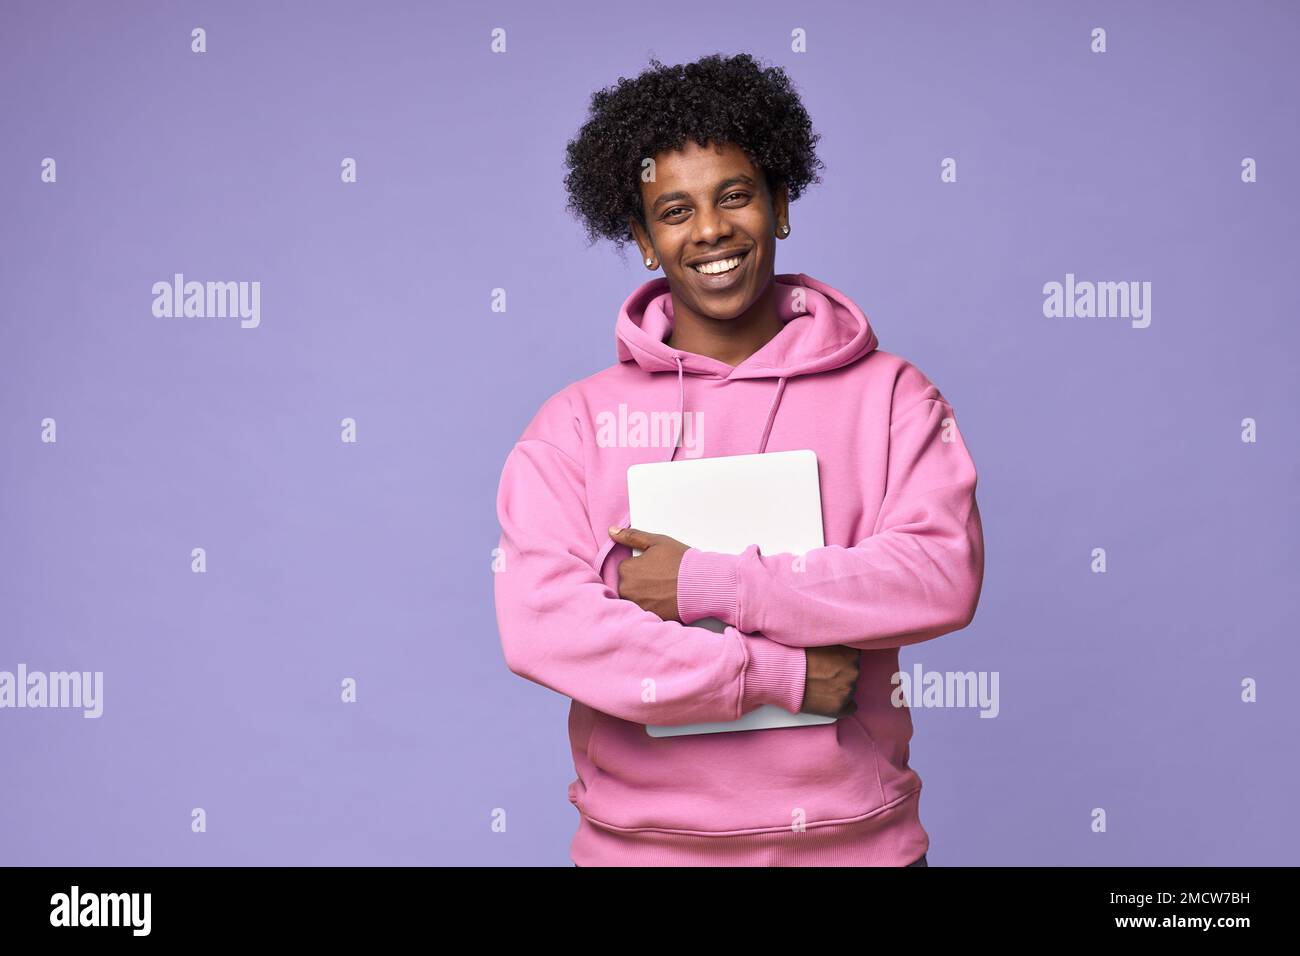 Happy African teen student holding laptop isolated on purple background. Stock Photo